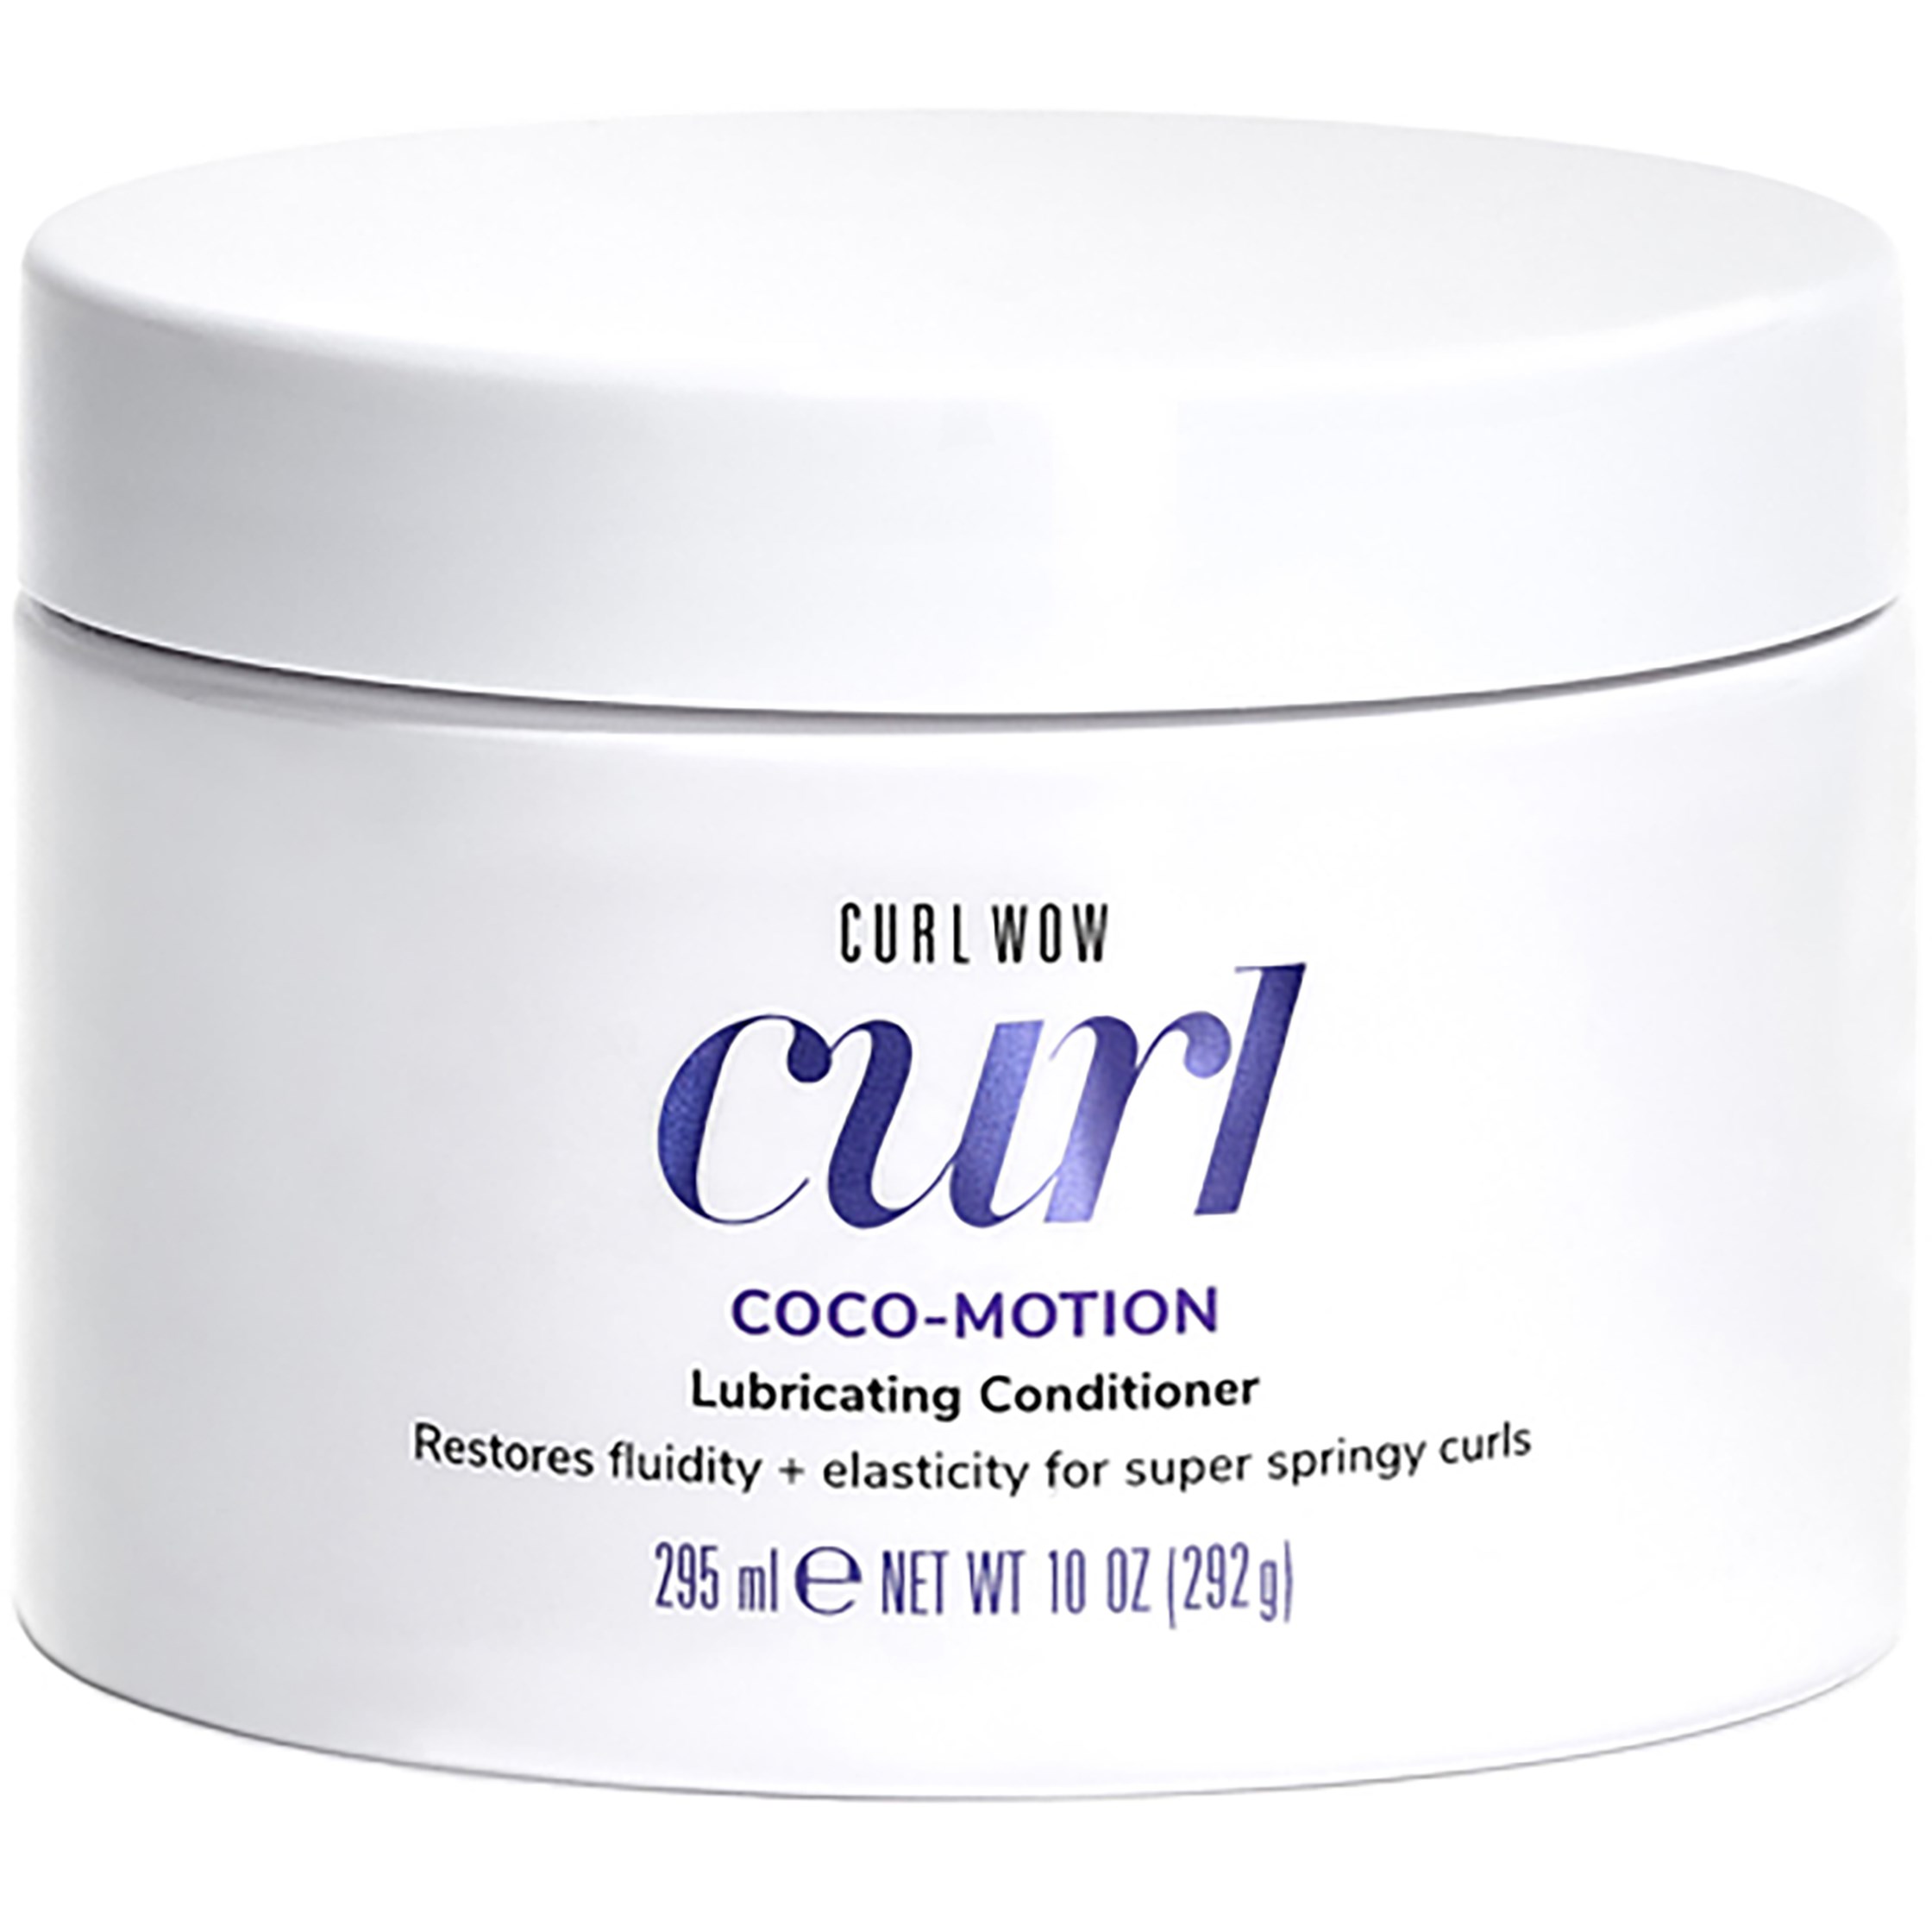 Läs mer om Color Wow Curl Curl Wow Coco Motion Lubricating Conditioner 295 ml